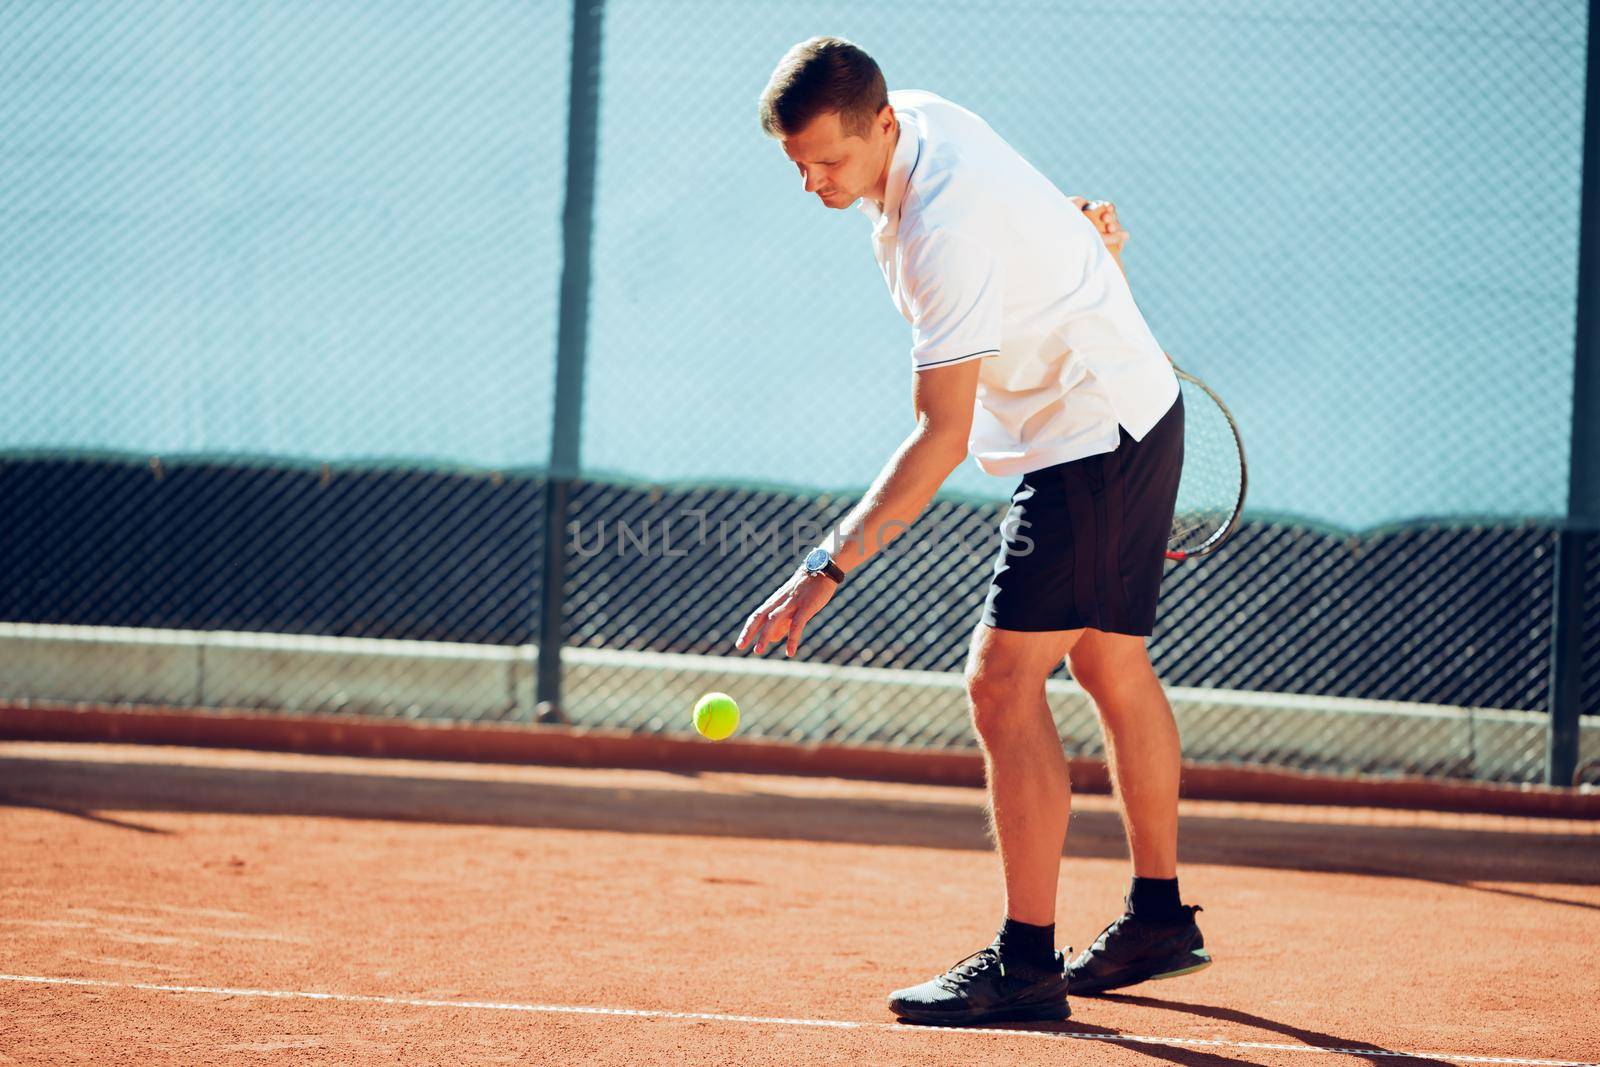 Young proffesional tennis player doing a serve of ball